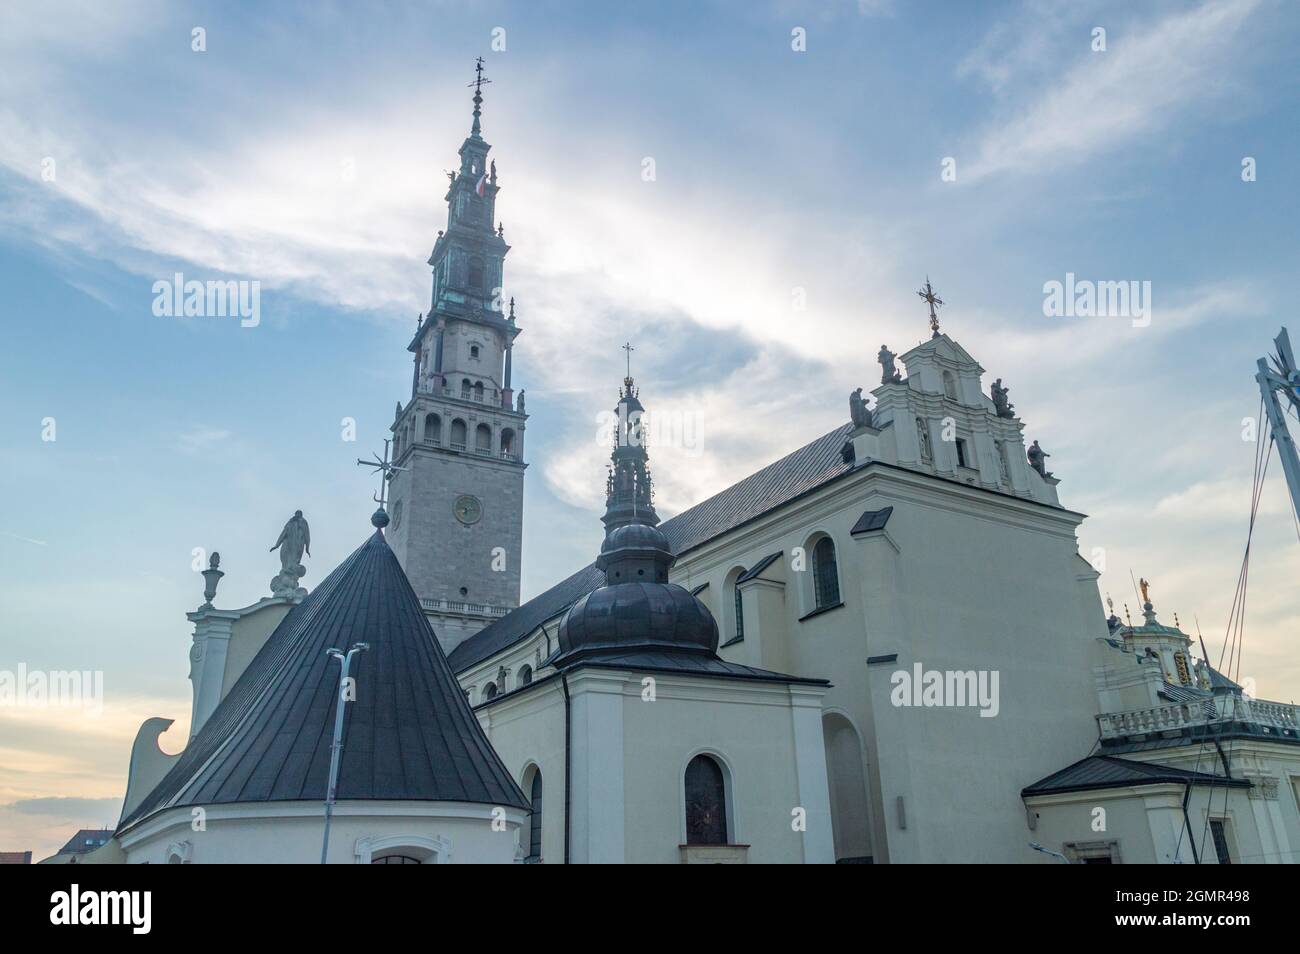 Roofs of Jasna Gora Monastery and belfry and the tower at sunset in Czestochowa, Poland. Stock Photo